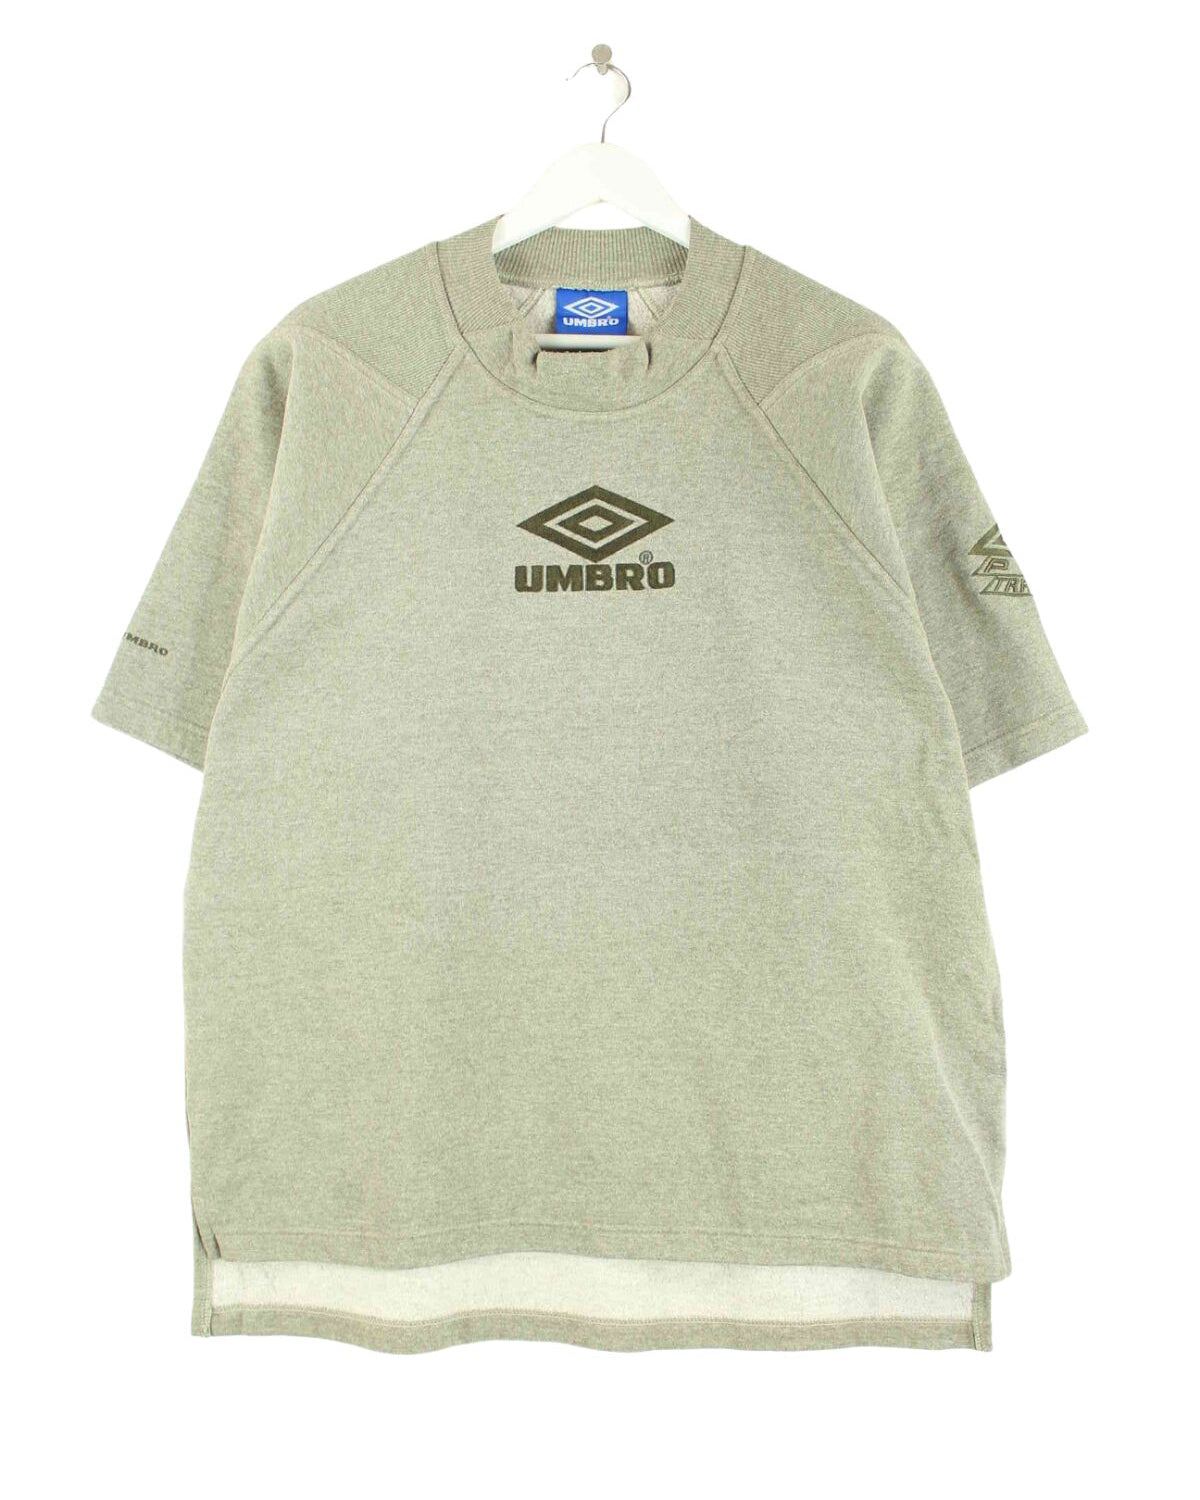 Umbro 90s Vintage Embroidered Heavy T-Shirt Grün XL (front image)